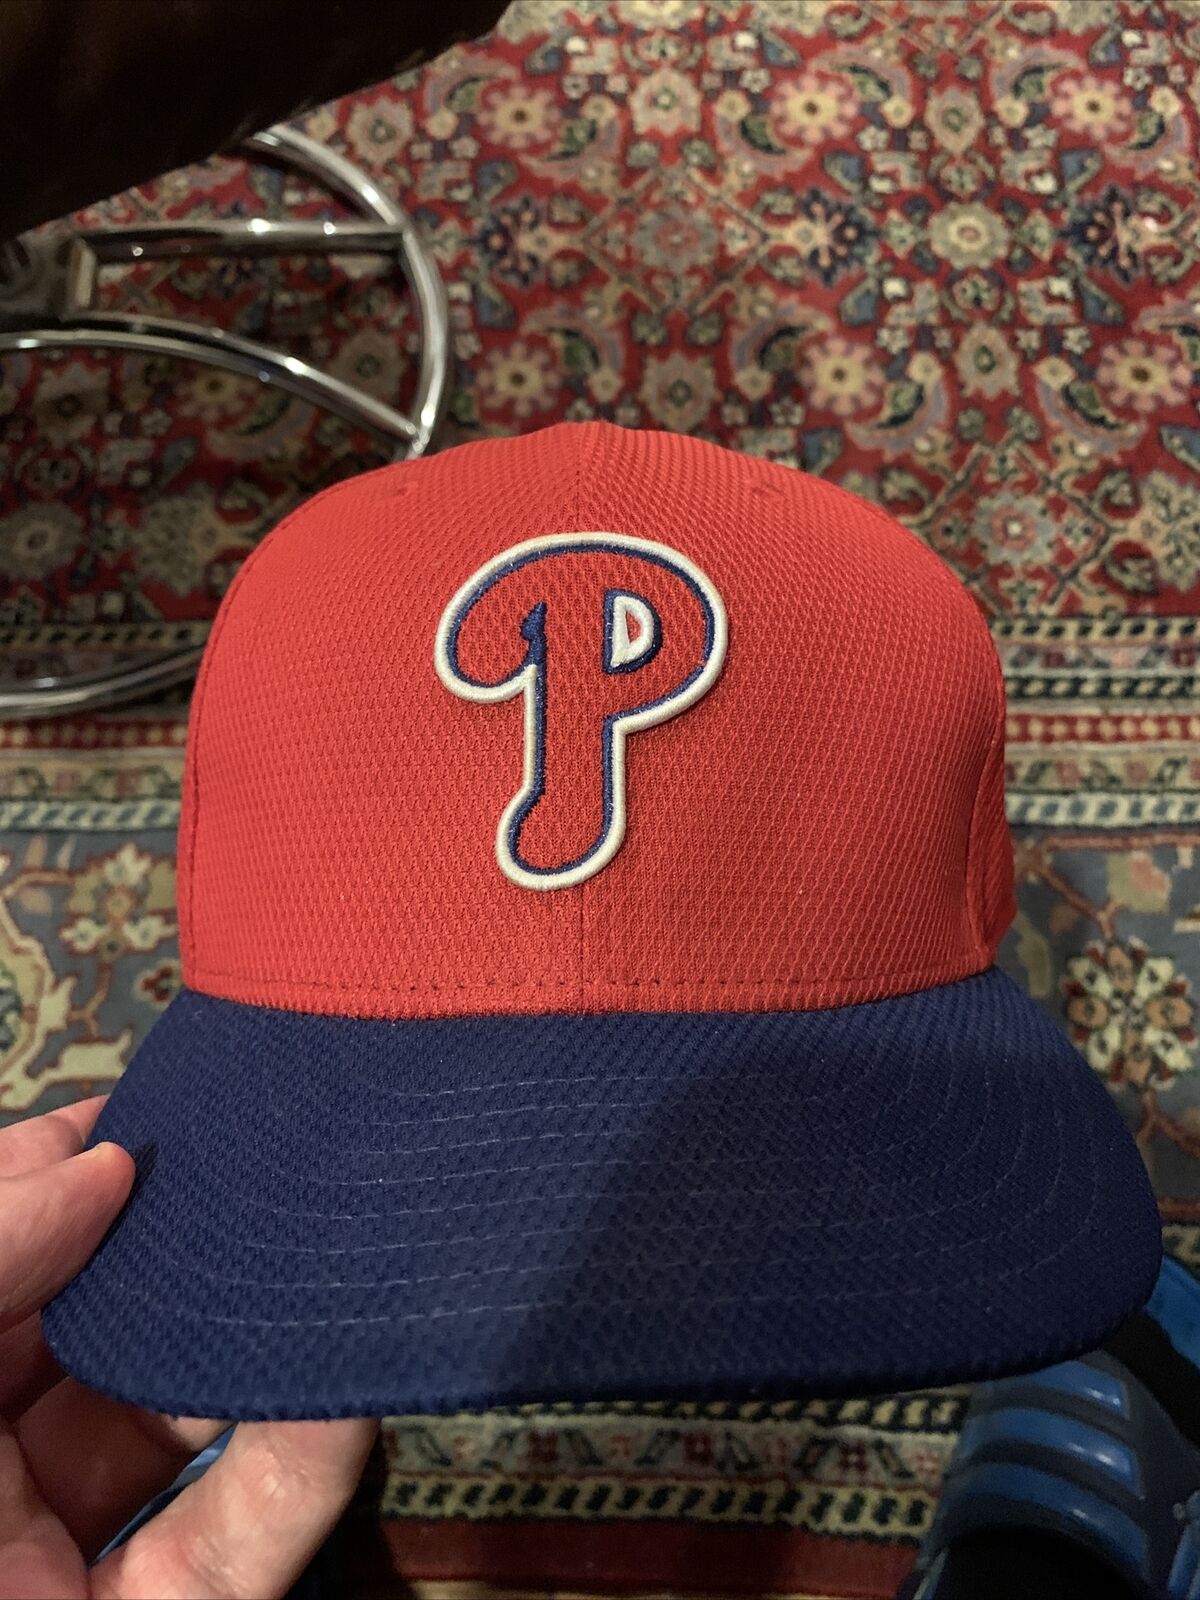 2016 Phillies Game Used Issued Hat Cap Mlb Authtenticated 7 1/8 Spring Training